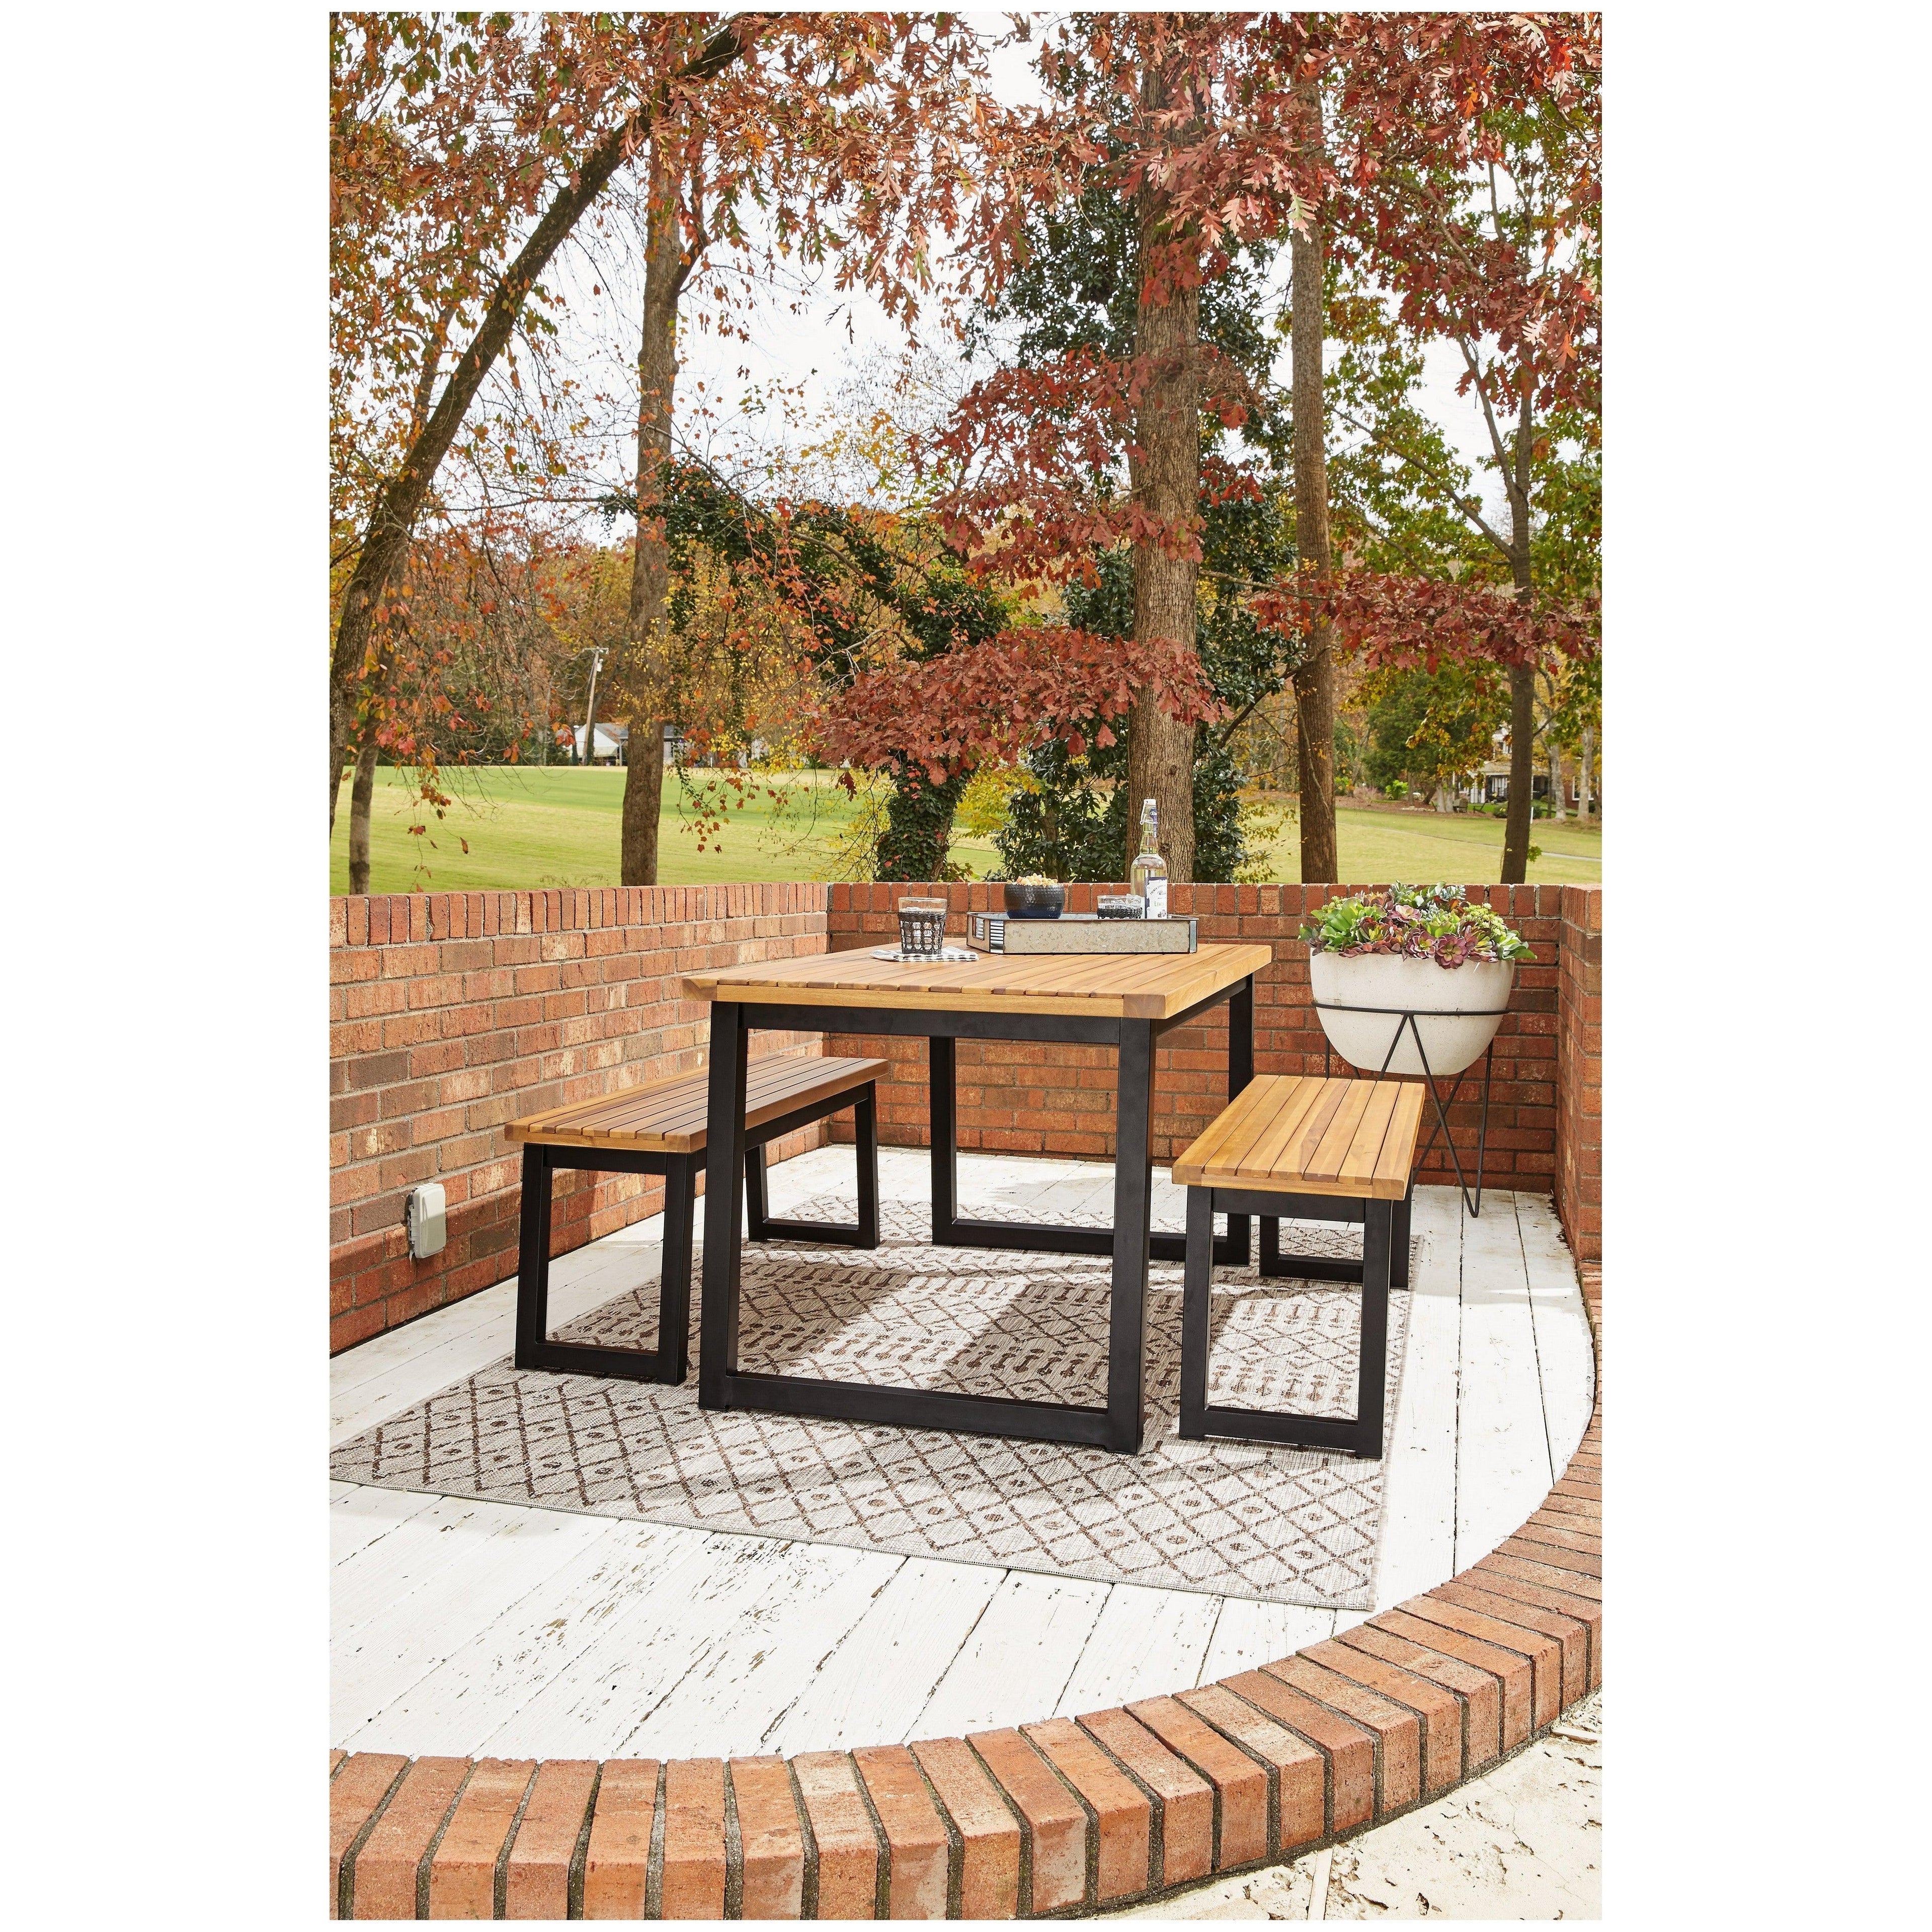 Town Wood Outdoor Dining Table Set (Set of 3) Ash-P220-115